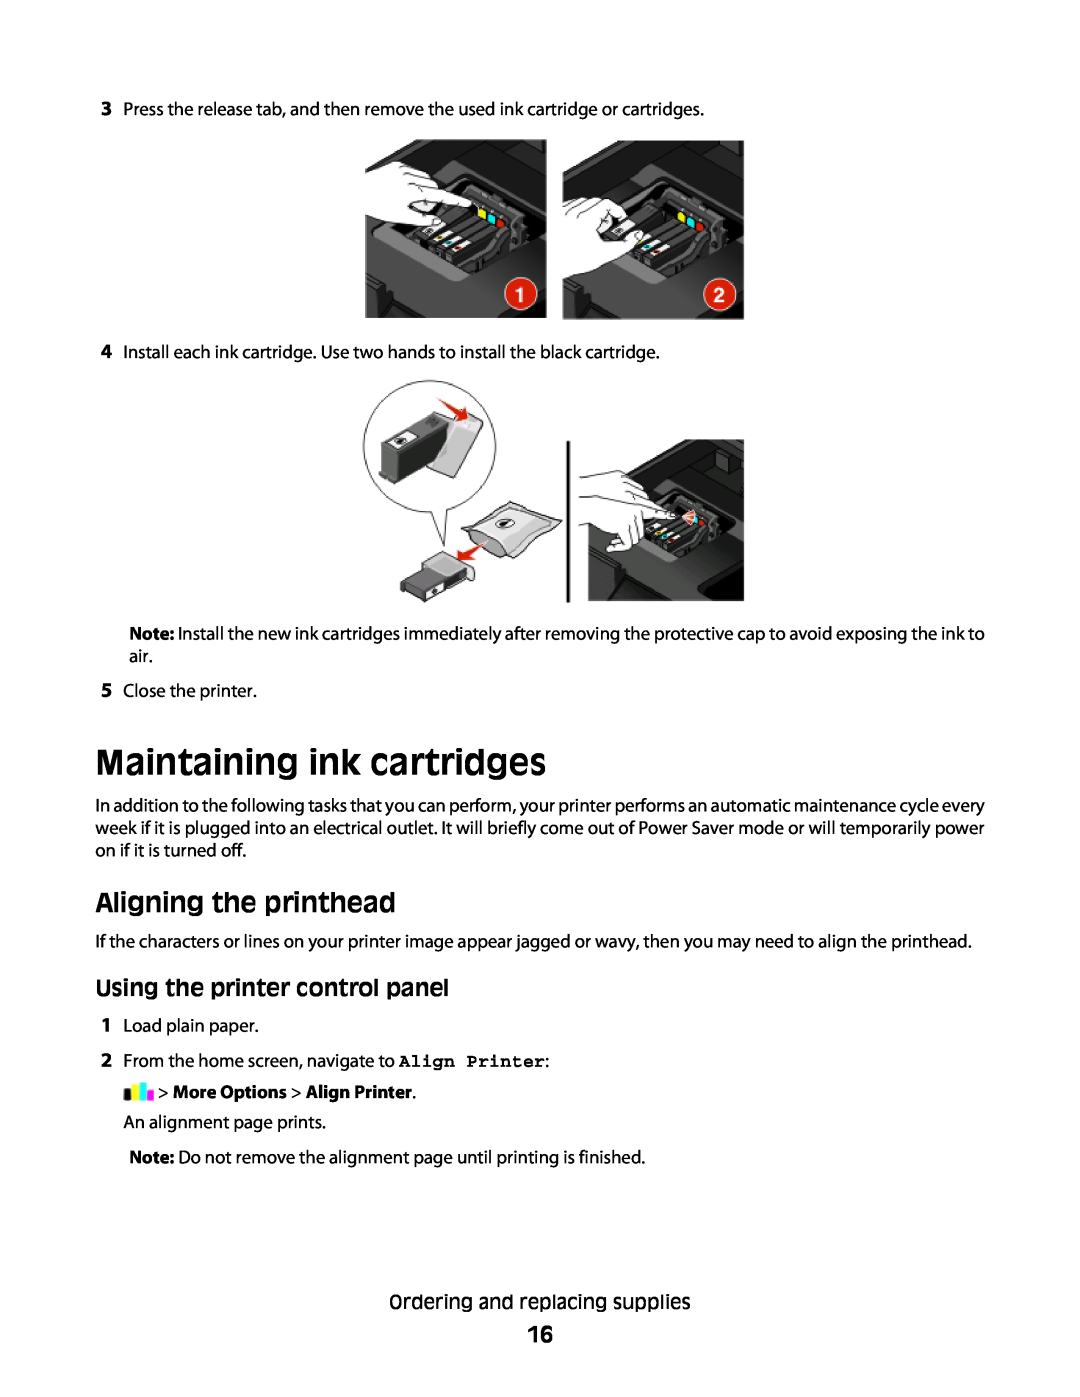 Lexmark Pro803, Pro800 manual Maintaining ink cartridges, Aligning the printhead, Using the printer control panel 